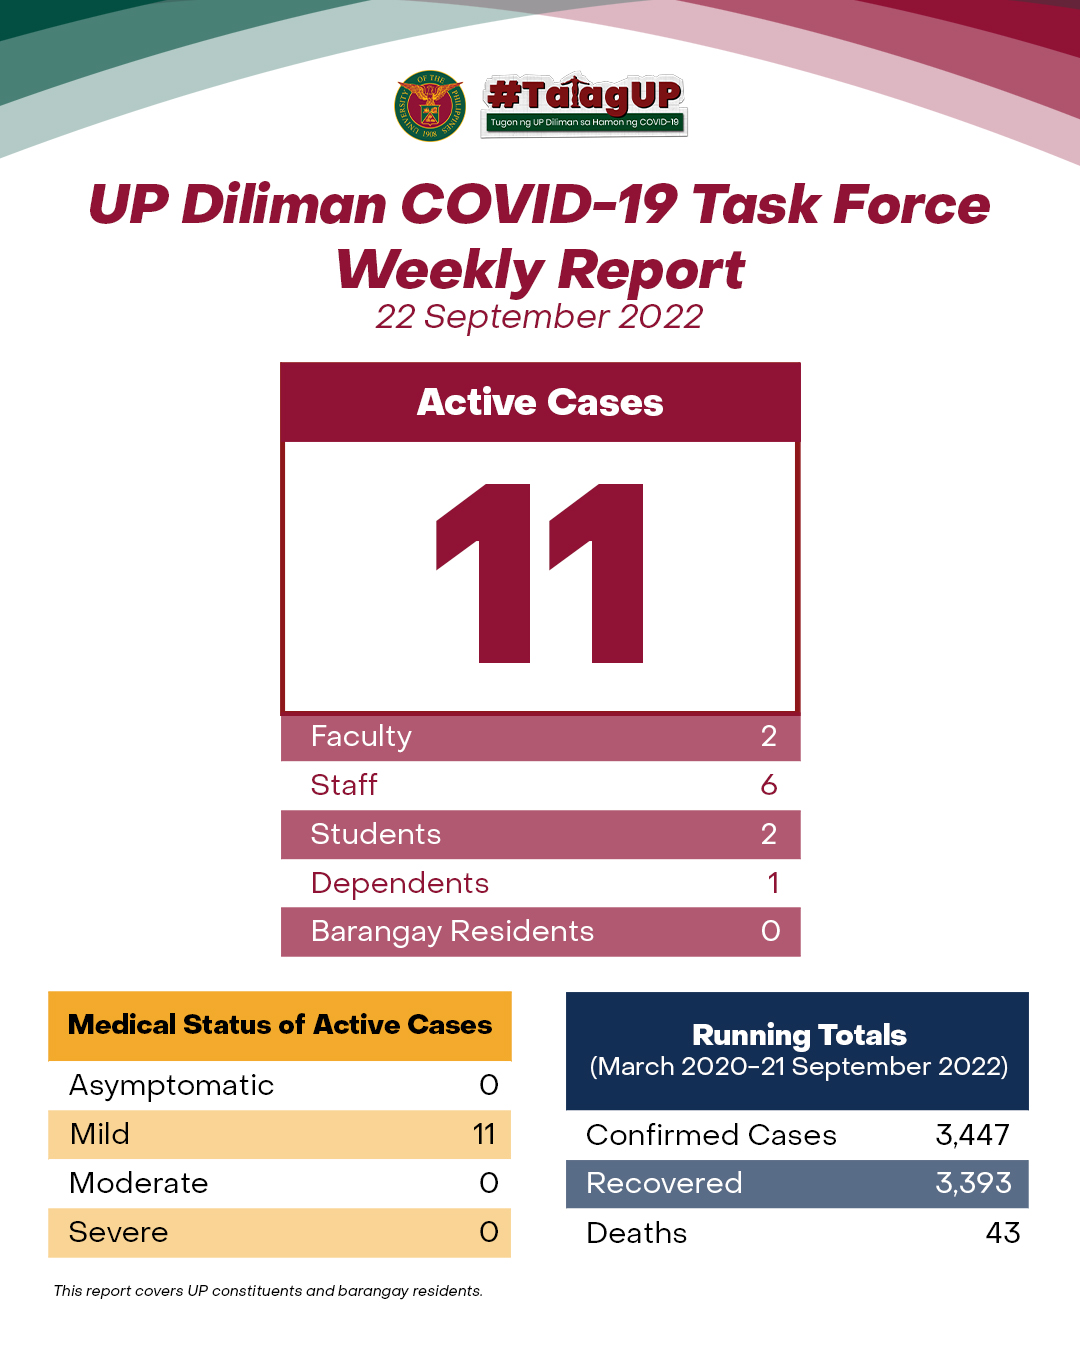 UP Diliman COVID-19 Task Force Weekly Report (22 September 2022)